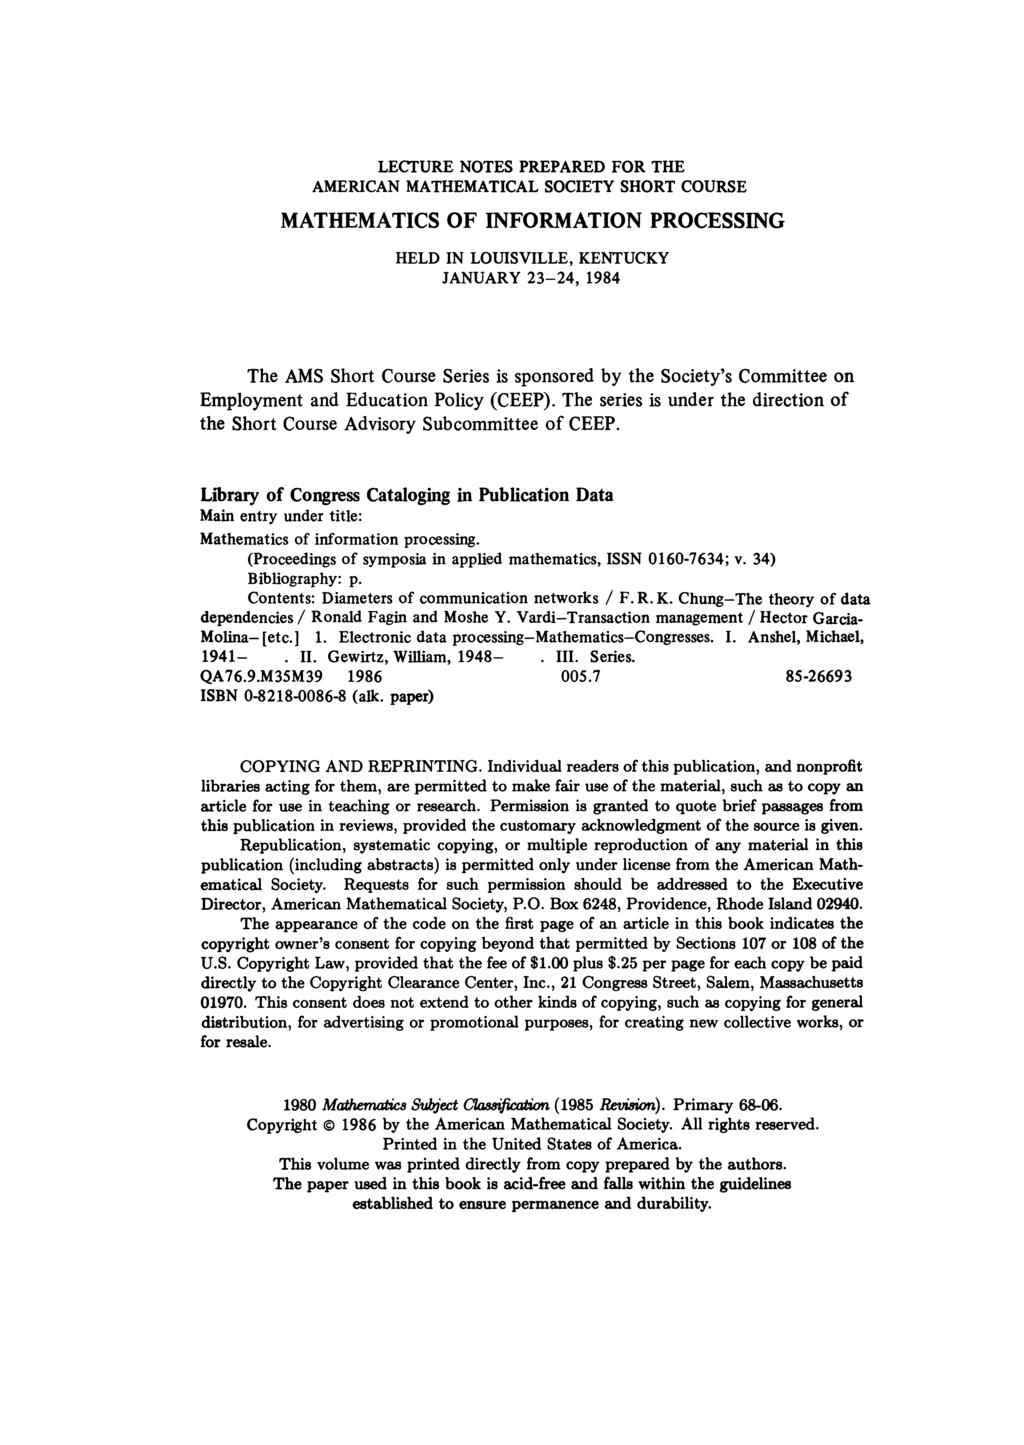 LECTURE NOTES PREPARED FOR THE AMERICAN MATHEMATICAL SOCIETY SHORT COURSE MATHEMATICS OF INFORMATION PROCESSING HELD IN LOUISVILLE, KENTUCKY JANUARY 23-24, 1984 The AMS Short Course Series is